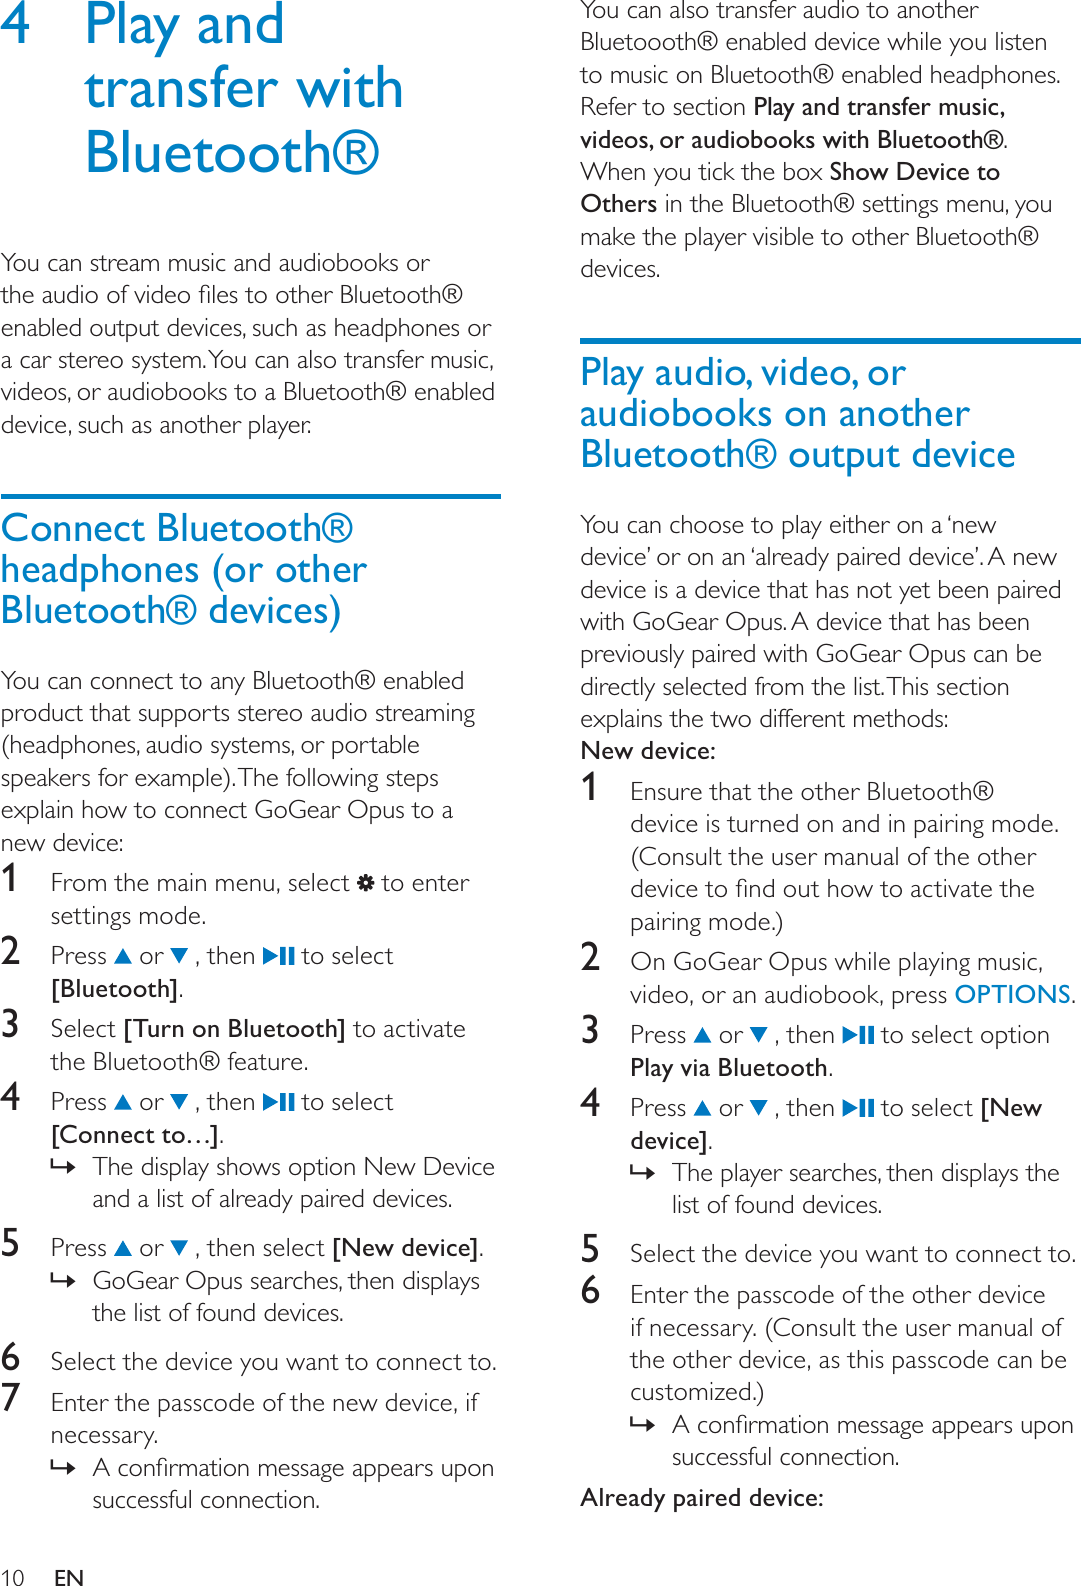 10You can also transfer audio to another Bluetoooth® enabled device while you listen to music on Bluetooth® enabled headphones. Refer to section Play and transfer music, videos, or audiobooks with Bluetooth®.When you tick the box Show Device to Others in the Bluetooth® settings menu, you make the player visible to other Bluetooth® devices.Play audio, video, or audiobooks on another Bluetooth® output deviceYou can choose to play either on a ‘new device’ or on an ‘already paired device’. A new device is a device that has not yet been paired with GoGear Opus. A device that has been previously paired with GoGear Opus can be directly selected from the list. This section explains the two different methods:New device:1Ensure that the other Bluetooth® device is turned on and in pairing mode. (Consult the user manual of the other GHYLFHWRÀQGRXWKRZWRDFWLYDWHWKHpairing mode.)2  On GoGear Opus while playing music, video, or an audiobook, press OPTIONS.3 Press  or   , then   to select option Play via Bluetooth.4 Press  or   , then   to select [New device].The player searches, then displays the »list of found devices.5Select the device you want to connect to.6Enter the passcode of the other device if necessary. (Consult the user manual of the other device, as this passcode can be customized.)$FRQÀUPDWLRQPHVVDJHDSSHDUVXSRQ»successful connection.Already paired device:4 Play and transfer with Bluetooth®You can stream music and audiobooks or WKHDXGLRRIYLGHRÀOHVWRRWKHU%OXHWRRWKenabled output devices, such as headphones or a car stereo system. You can also transfer music, videos, or audiobooks to a Bluetooth® enabled device, such as another player.Connect Bluetooth® headphones (or other Bluetooth® devices)You can connect to any Bluetooth® enabled product that supports stereo audio streaming (headphones, audio systems, or portable speakers for example). The following steps explain how to connect GoGear Opus to a new device:1From the main menu, select   to enter settings mode.2 Press  or   , then   to select [Bluetooth].3Select [Turn on Bluetooth] to activate the Bluetooth® feature.4 Press  or   , then   to select [Connect to…].The display shows option New Device »and a list of already paired devices.5 Press  or   , then select [New device].GoGear Opus searches, then displays »the list of found devices.6Select the device you want to connect to.7Enter the passcode of the new device, if necessary.$FRQÀUPDWLRQPHVVDJHDSSHDUVXSRQ»successful connection.EN